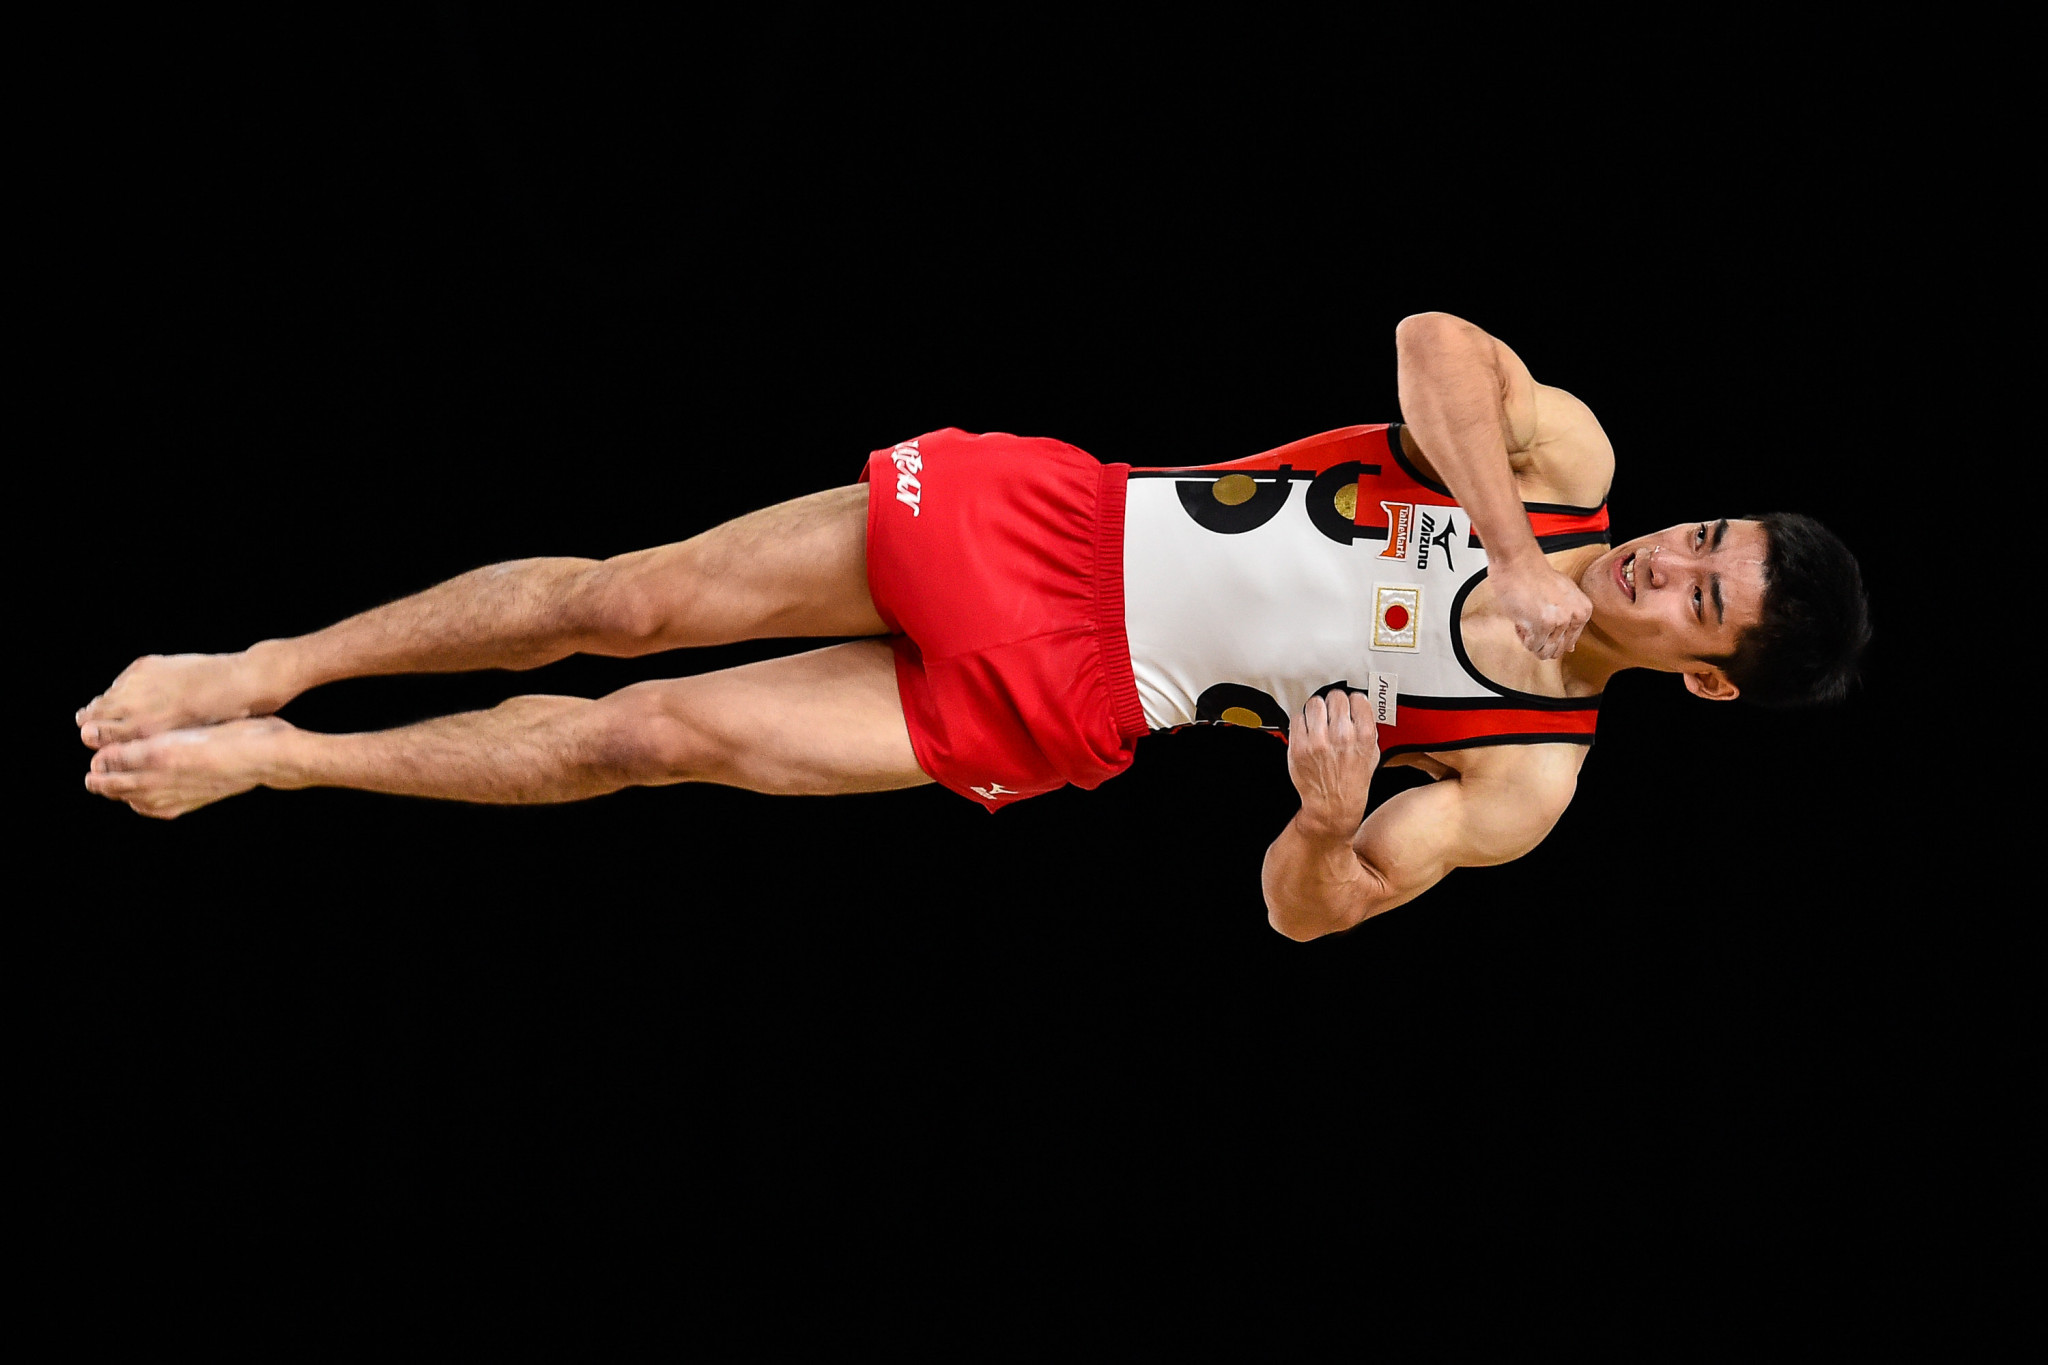 Japan's Kenzo Shirai put in another impressive performance to claim his third straight world floor title ©Getty Images